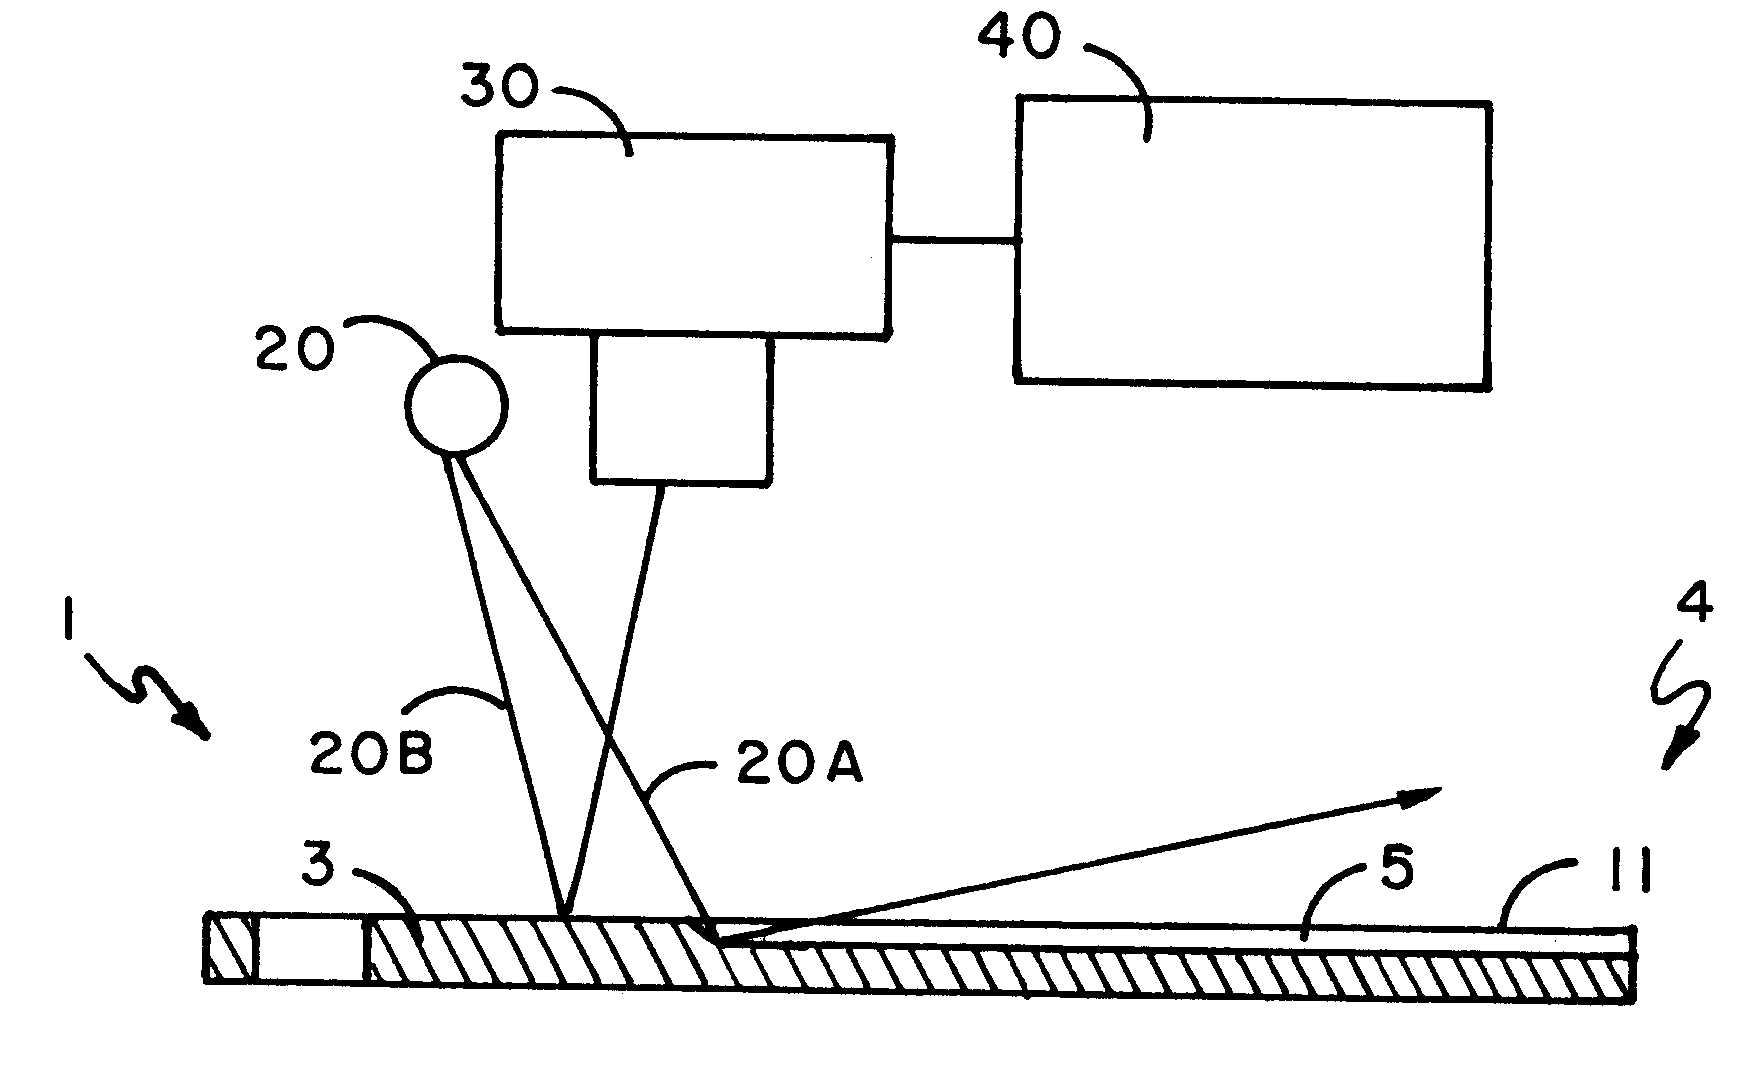 Key imaging system and method